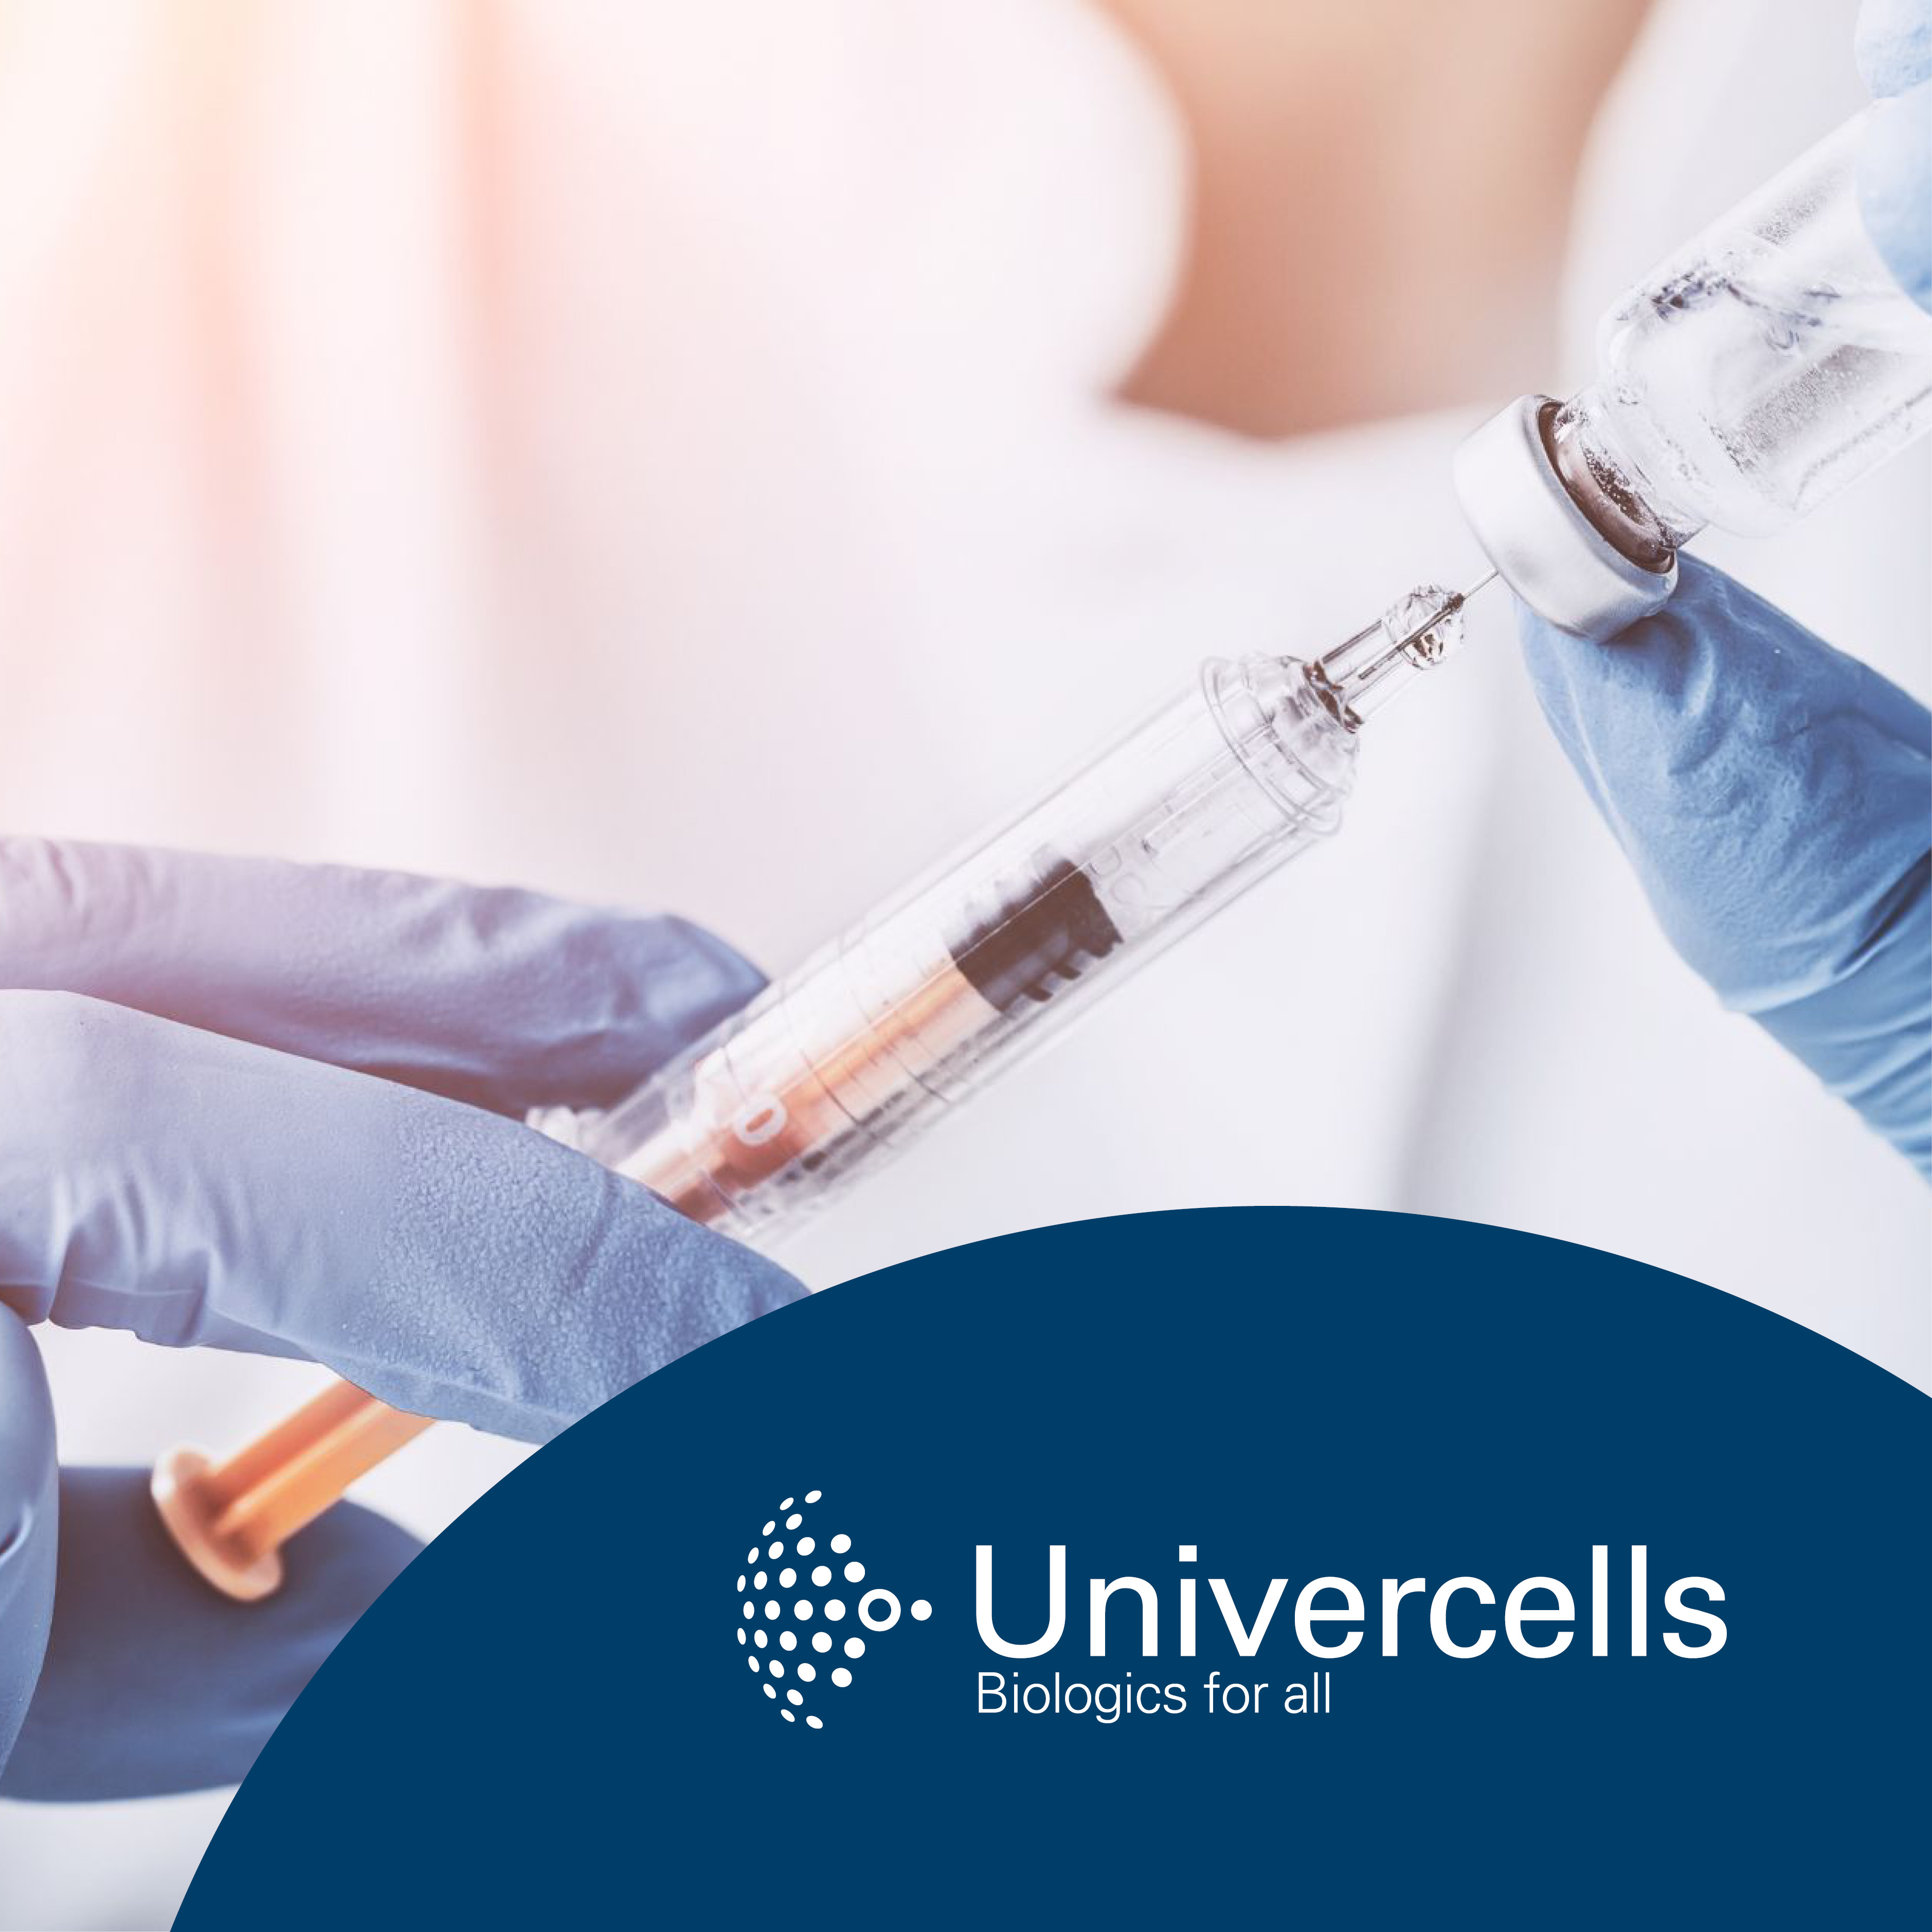 Press release: Altamira Therapeutics announces collaboration with Univercells Group on Nanoparticle-Delivered mRNA vaccines.